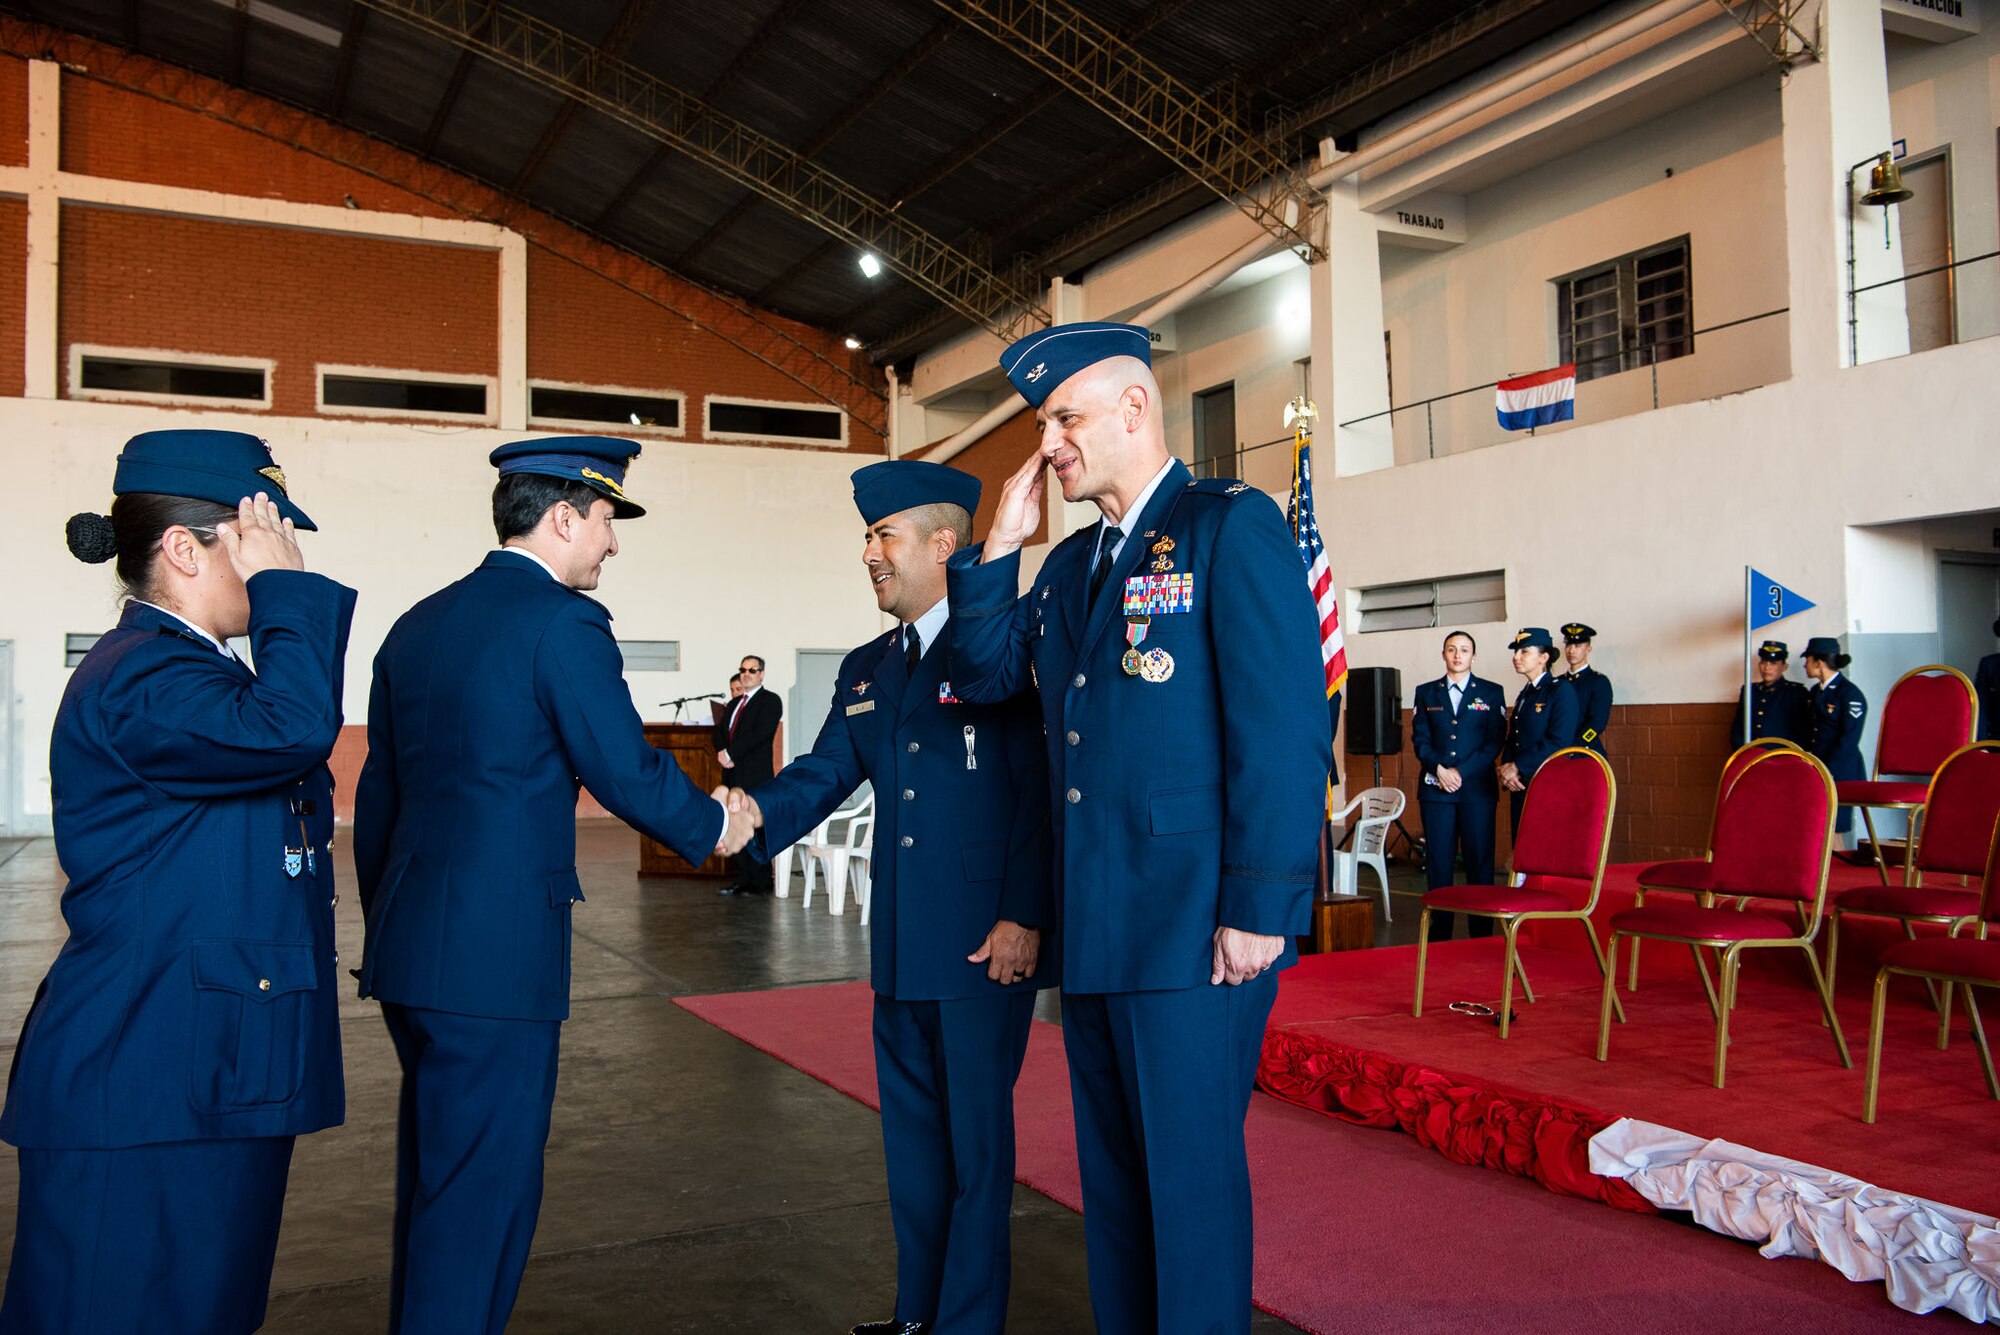 Four people frame the photo; the woman on the left is saluting the man positioned at the right side. The two people in the middle, both men, are shaking hands.